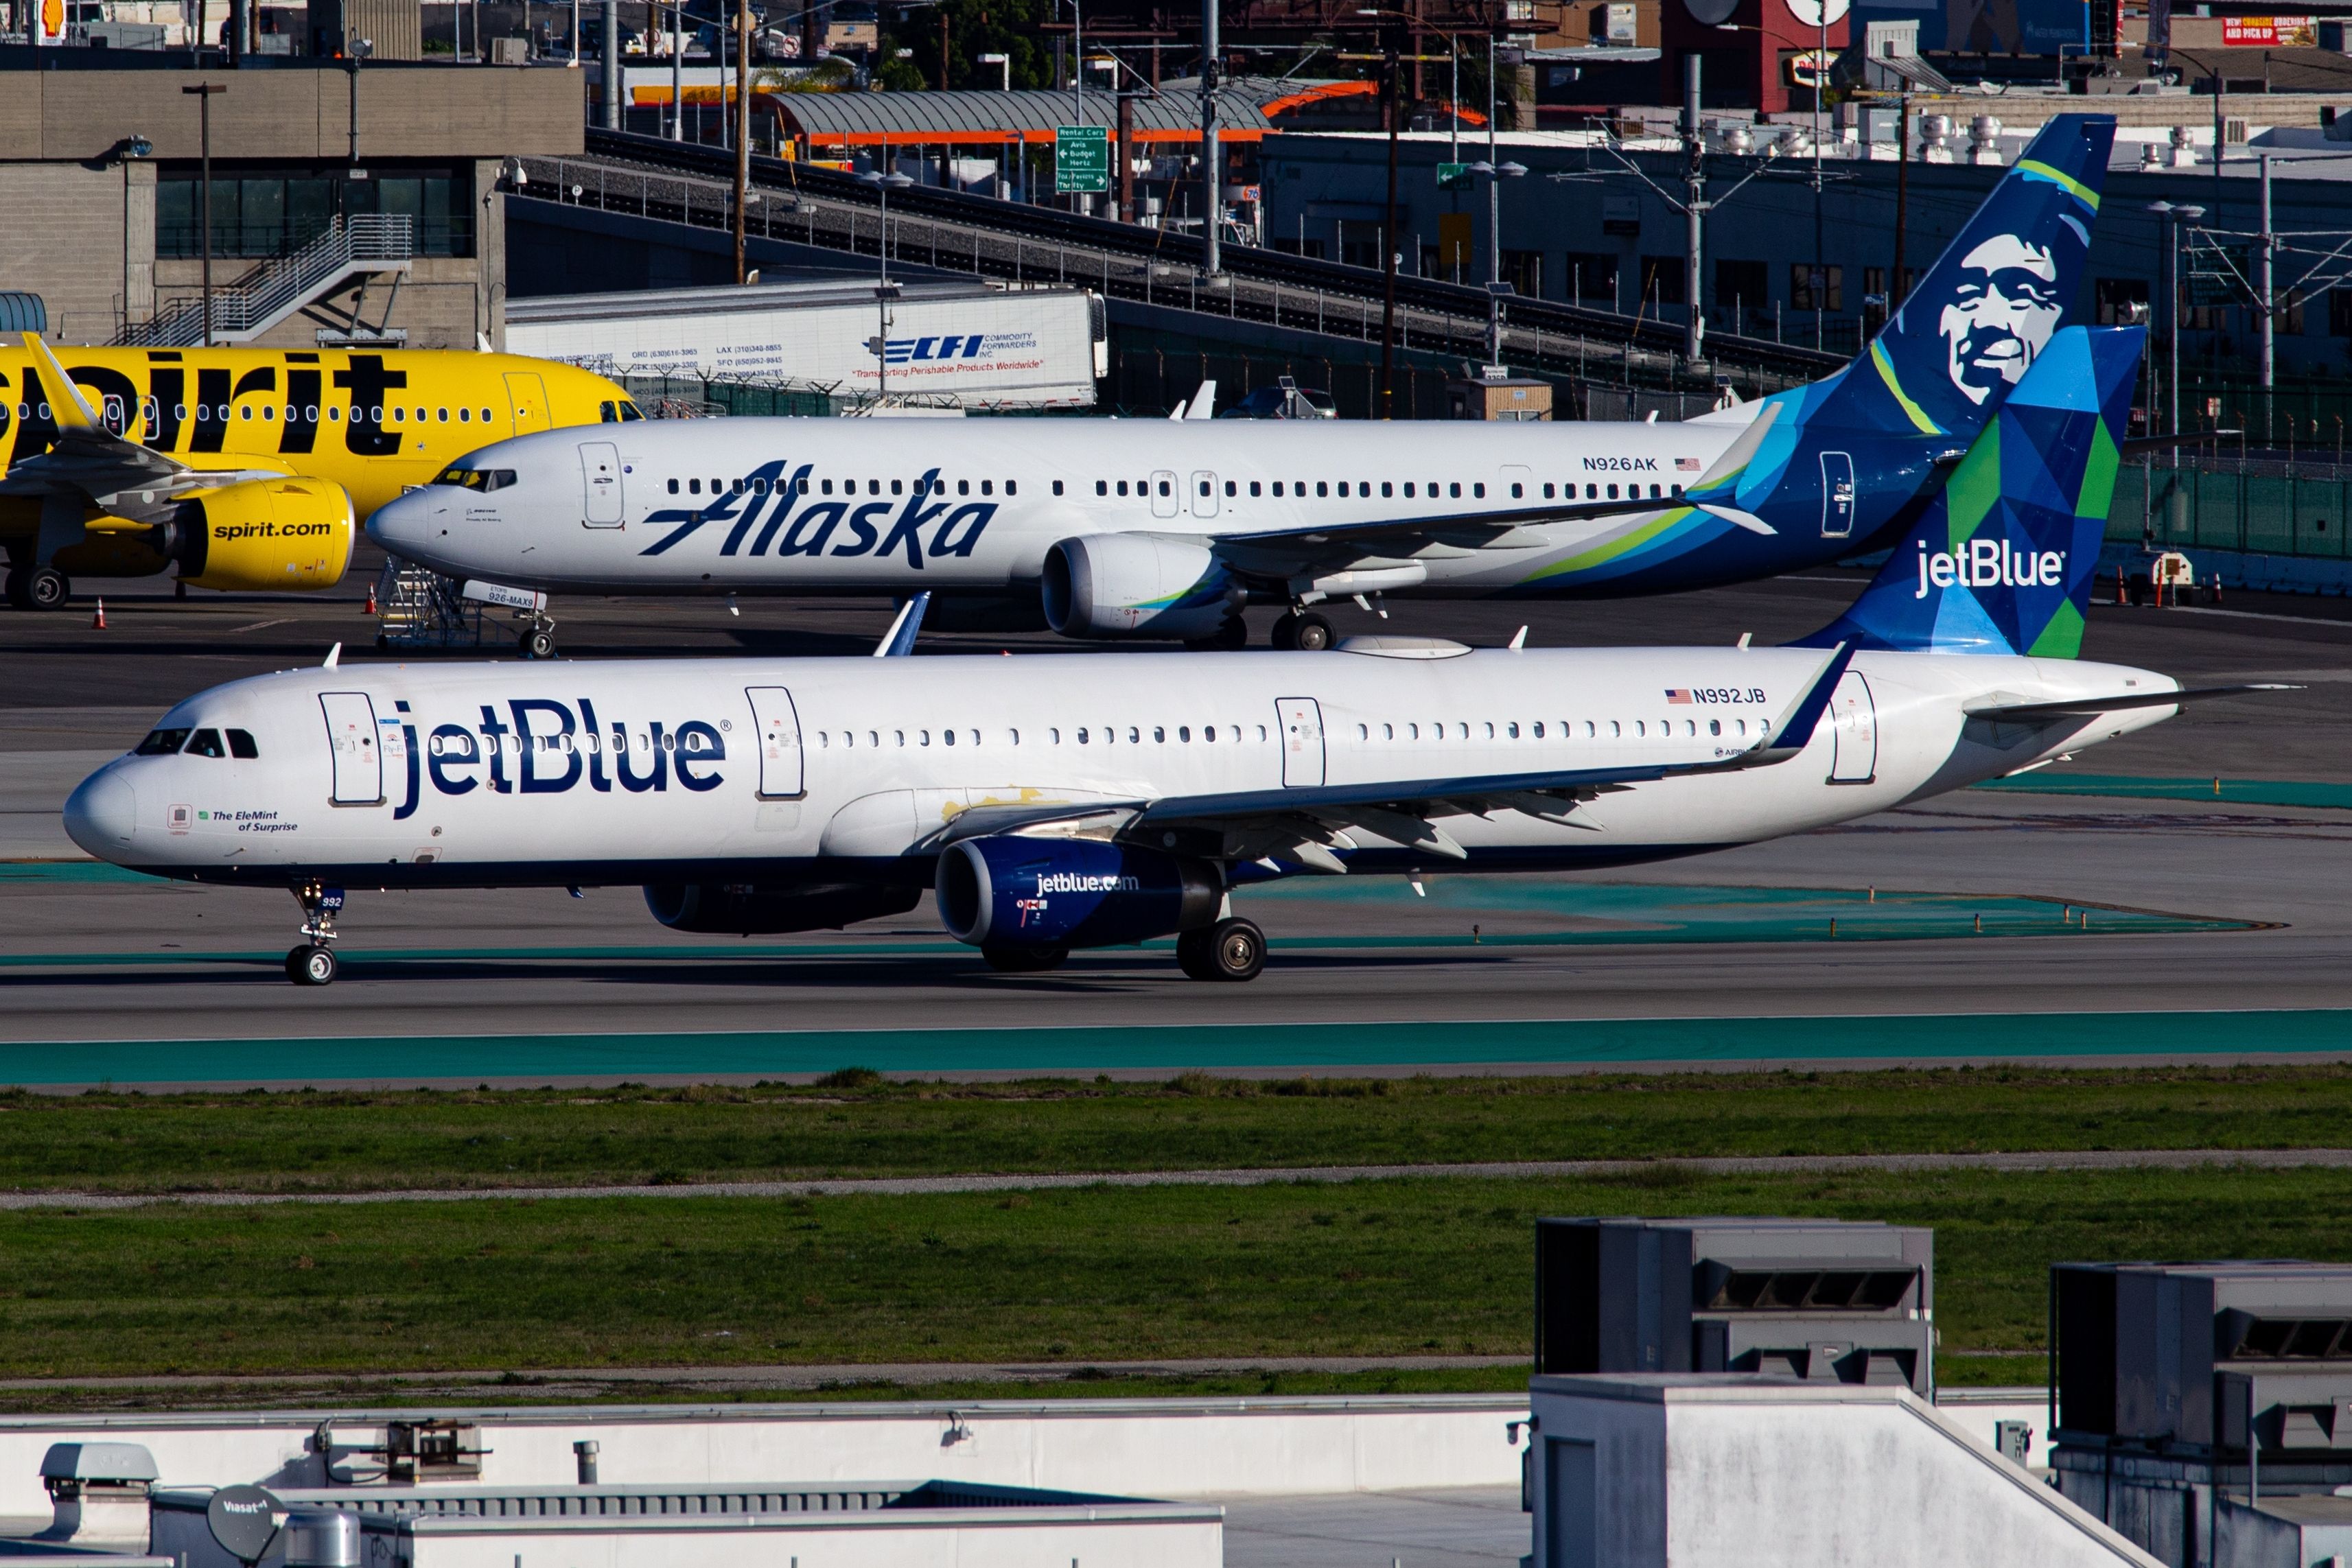 JetBlue Airways Airbus A321-231 at Los Angeles International Airport with Alaska Airlines Boeing 737 MAX 9 and Spirit Airlines Airbus A320N-271 in the background.